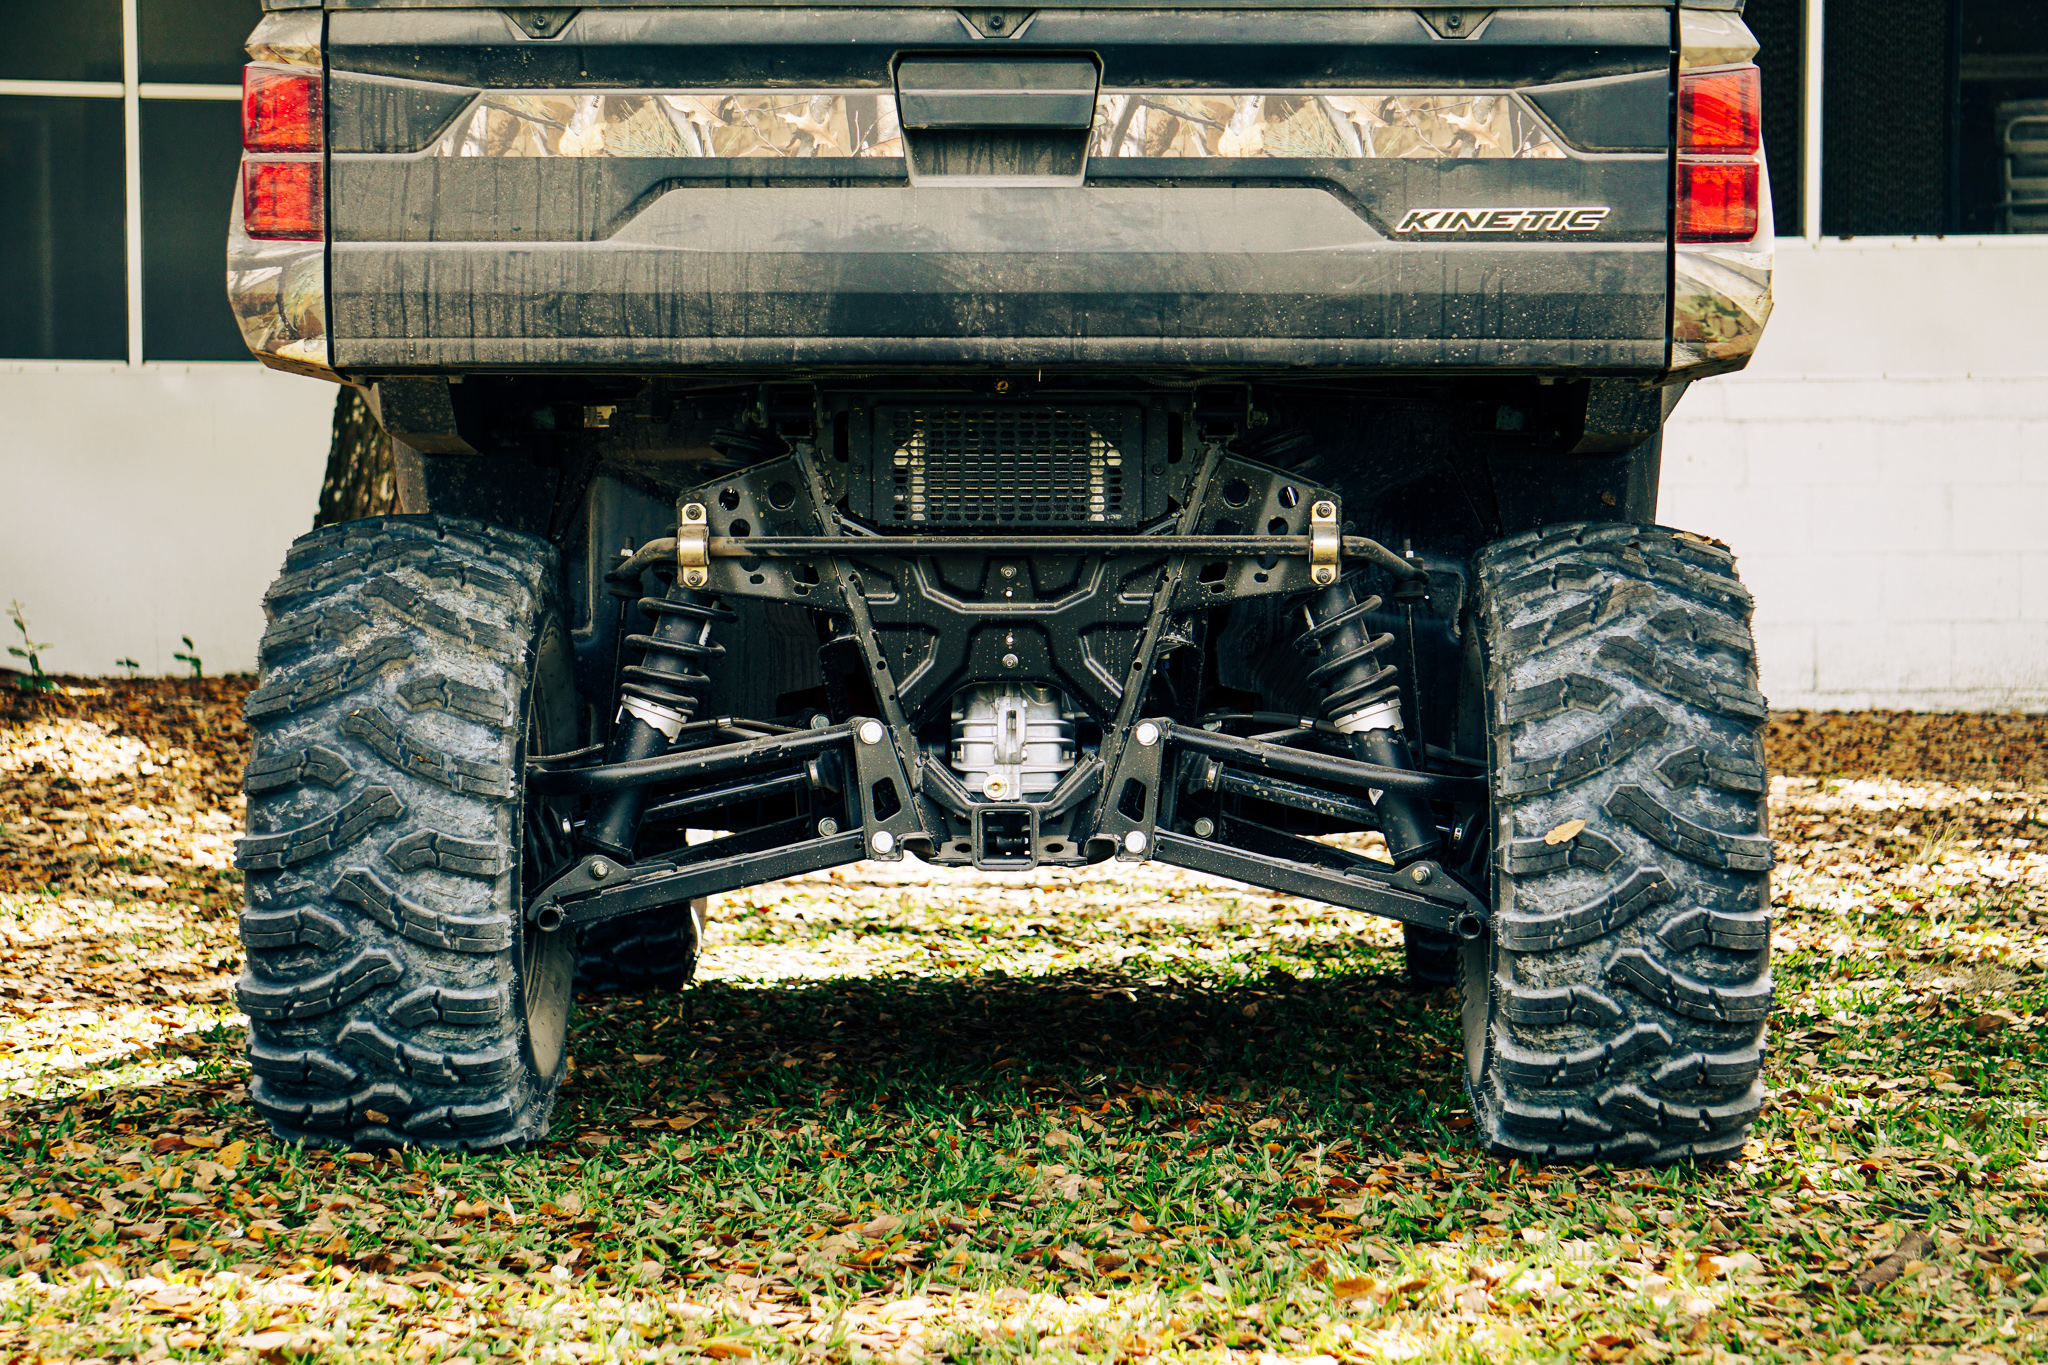 The rear wheels and suspension of the Polaris Ranger Kinetic.